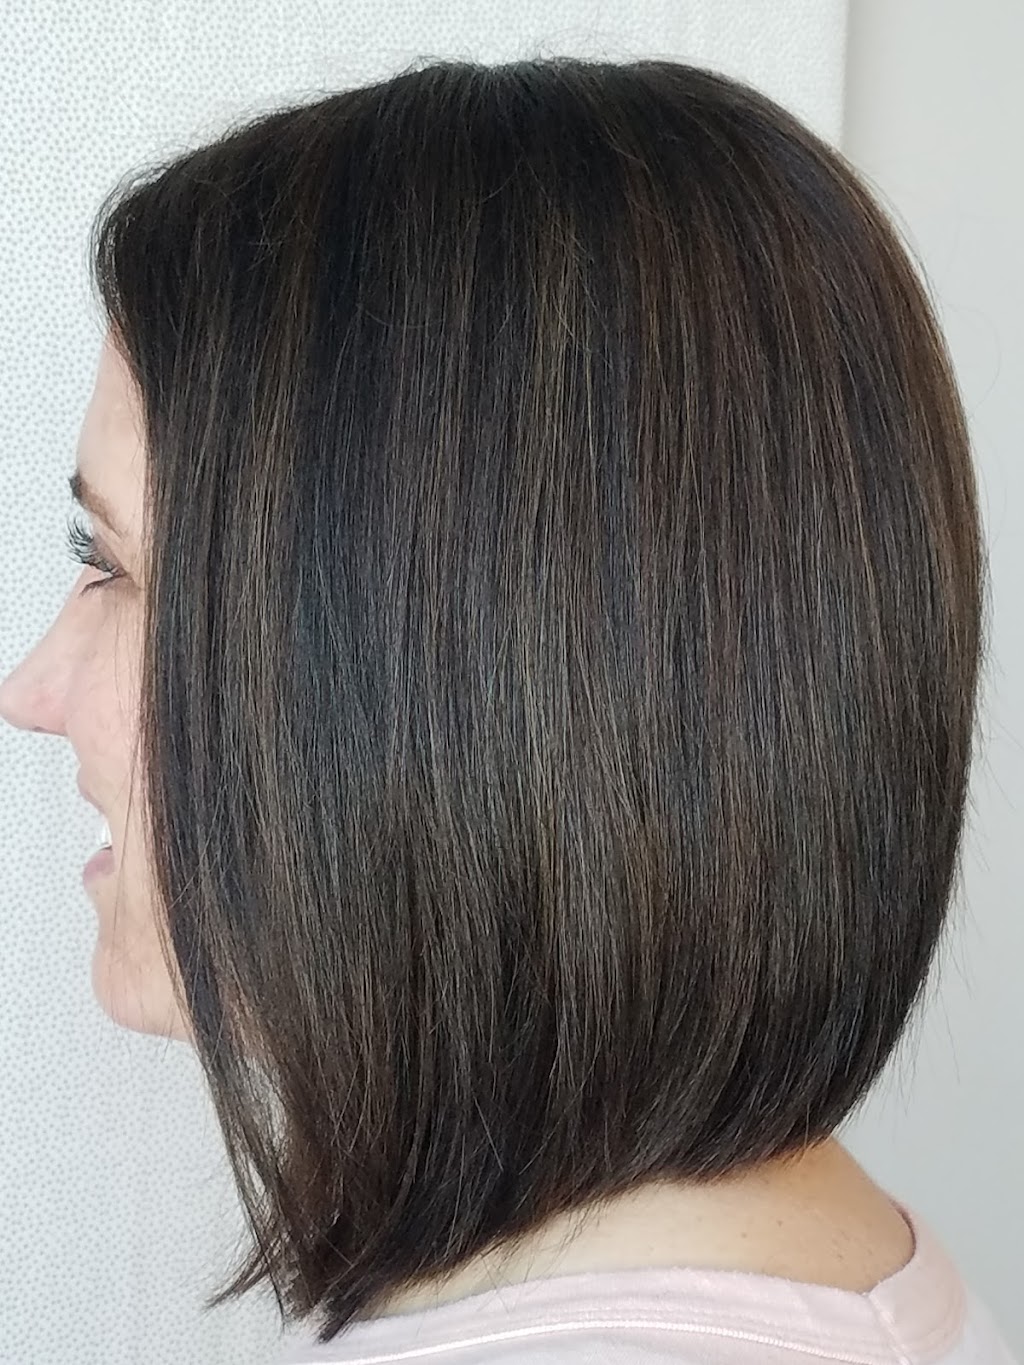 Hair By Natalie | 520 South Blvd Suite 11, Baraboo, WI 53913, USA | Phone: (608) 448-6885